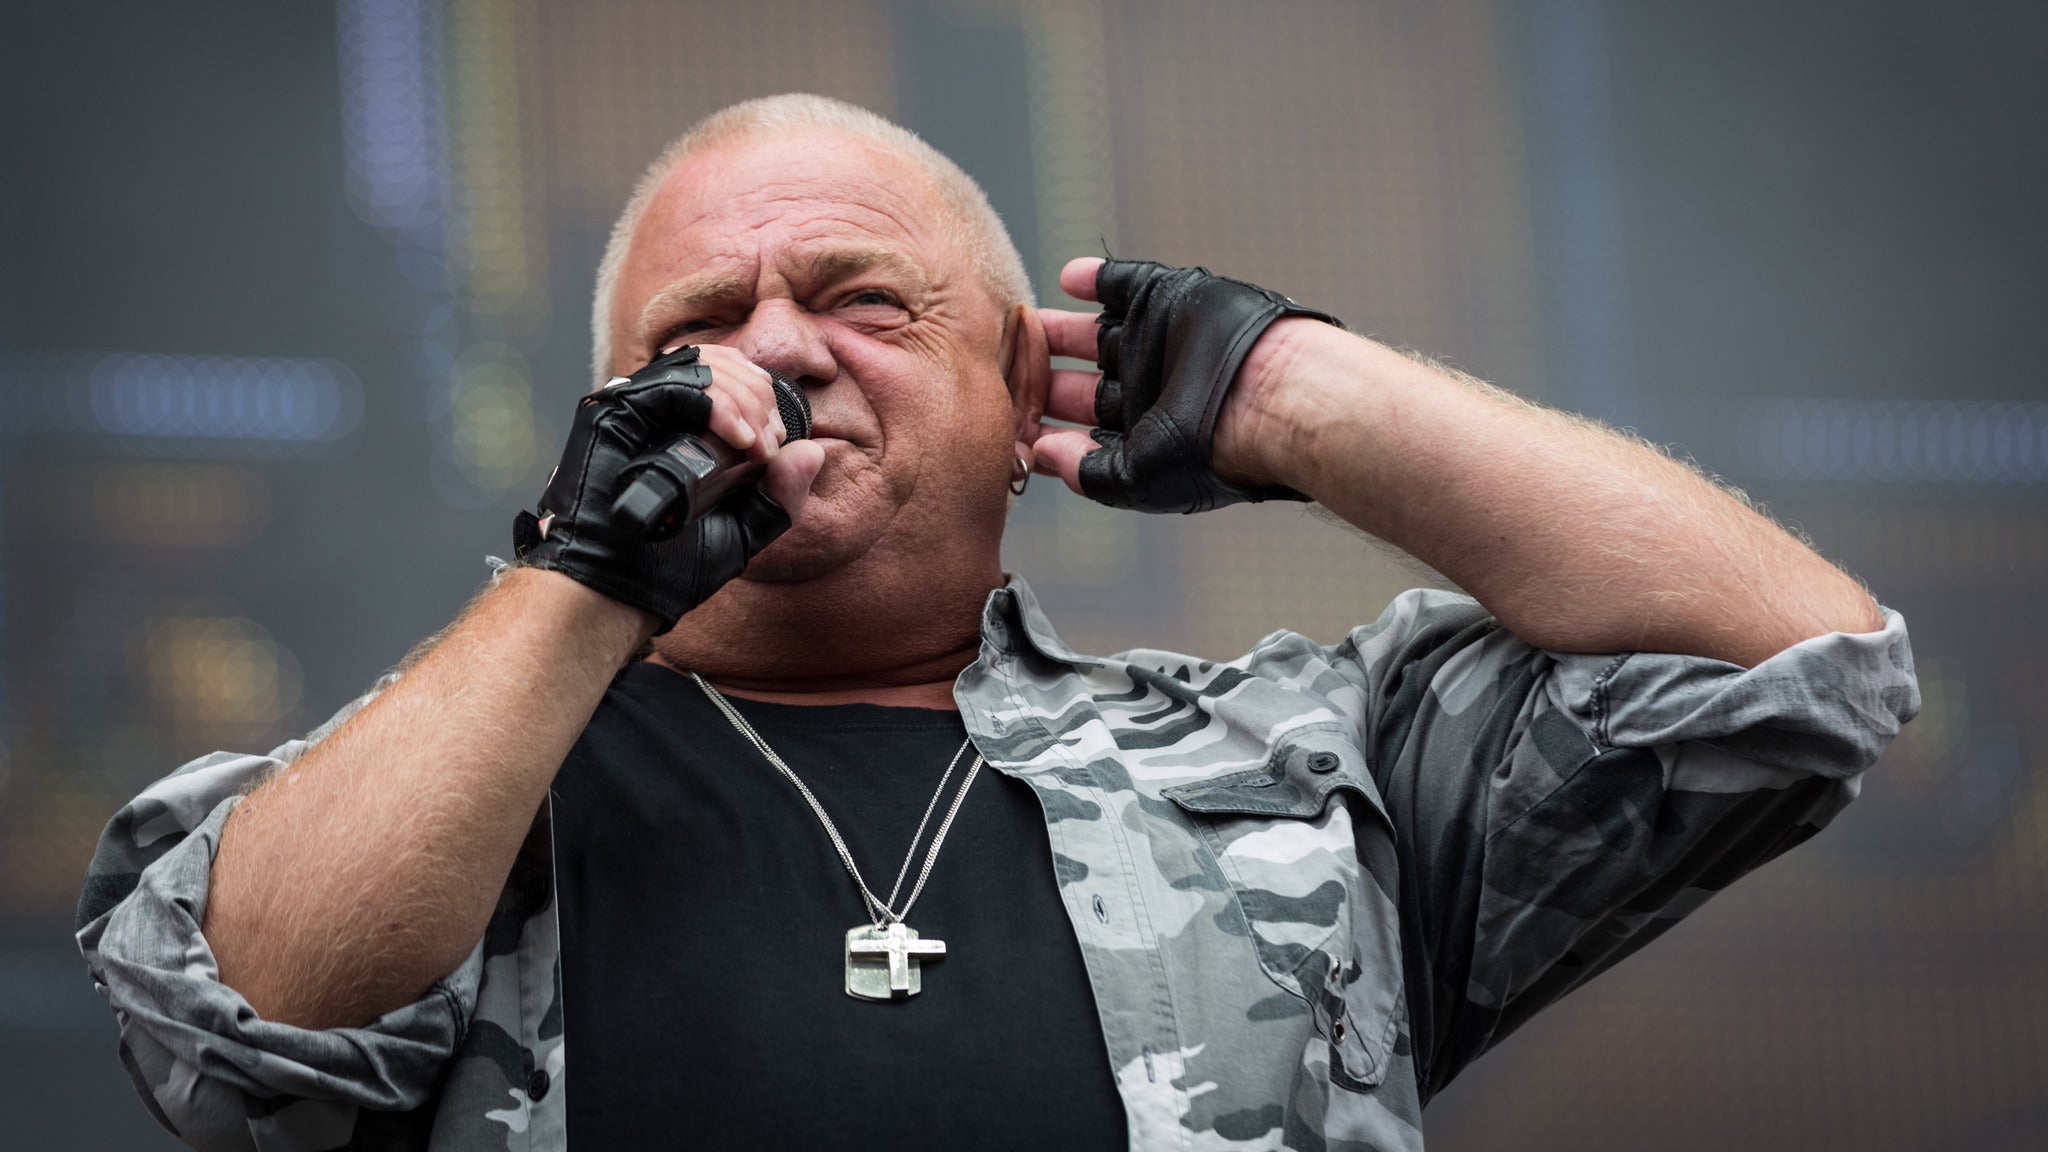 DIRKSCHNEIDER - Back To The Roots Part II in Asbury Park promo photo for Live Nation Mobile App presale offer code